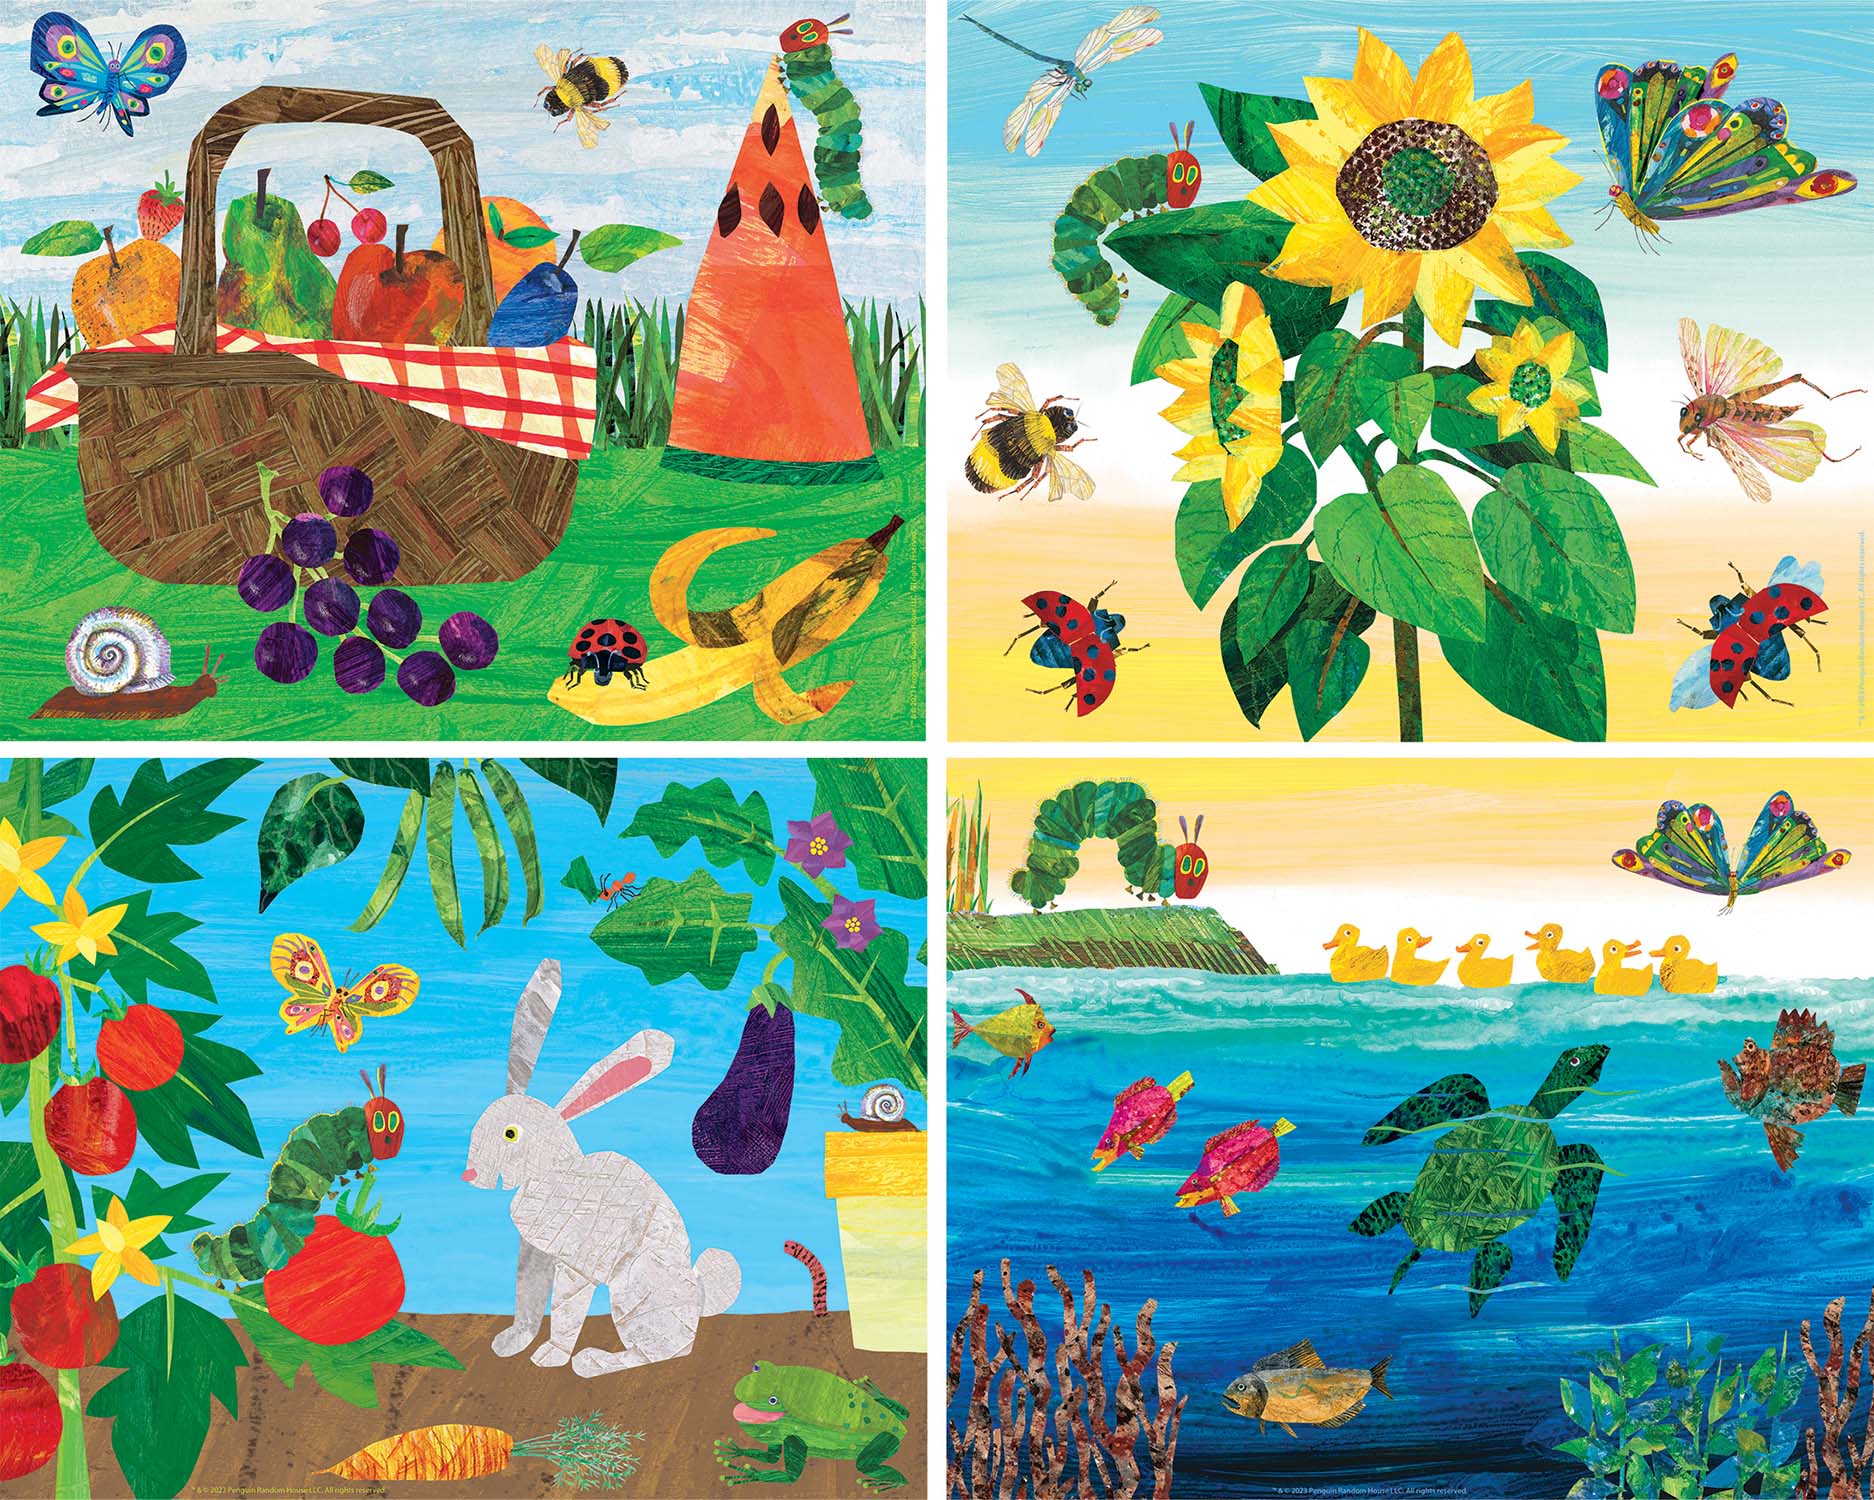 Eric Carle - 4-Pack 48 Piece Puzzles Butterflies and Insects Jigsaw Puzzle